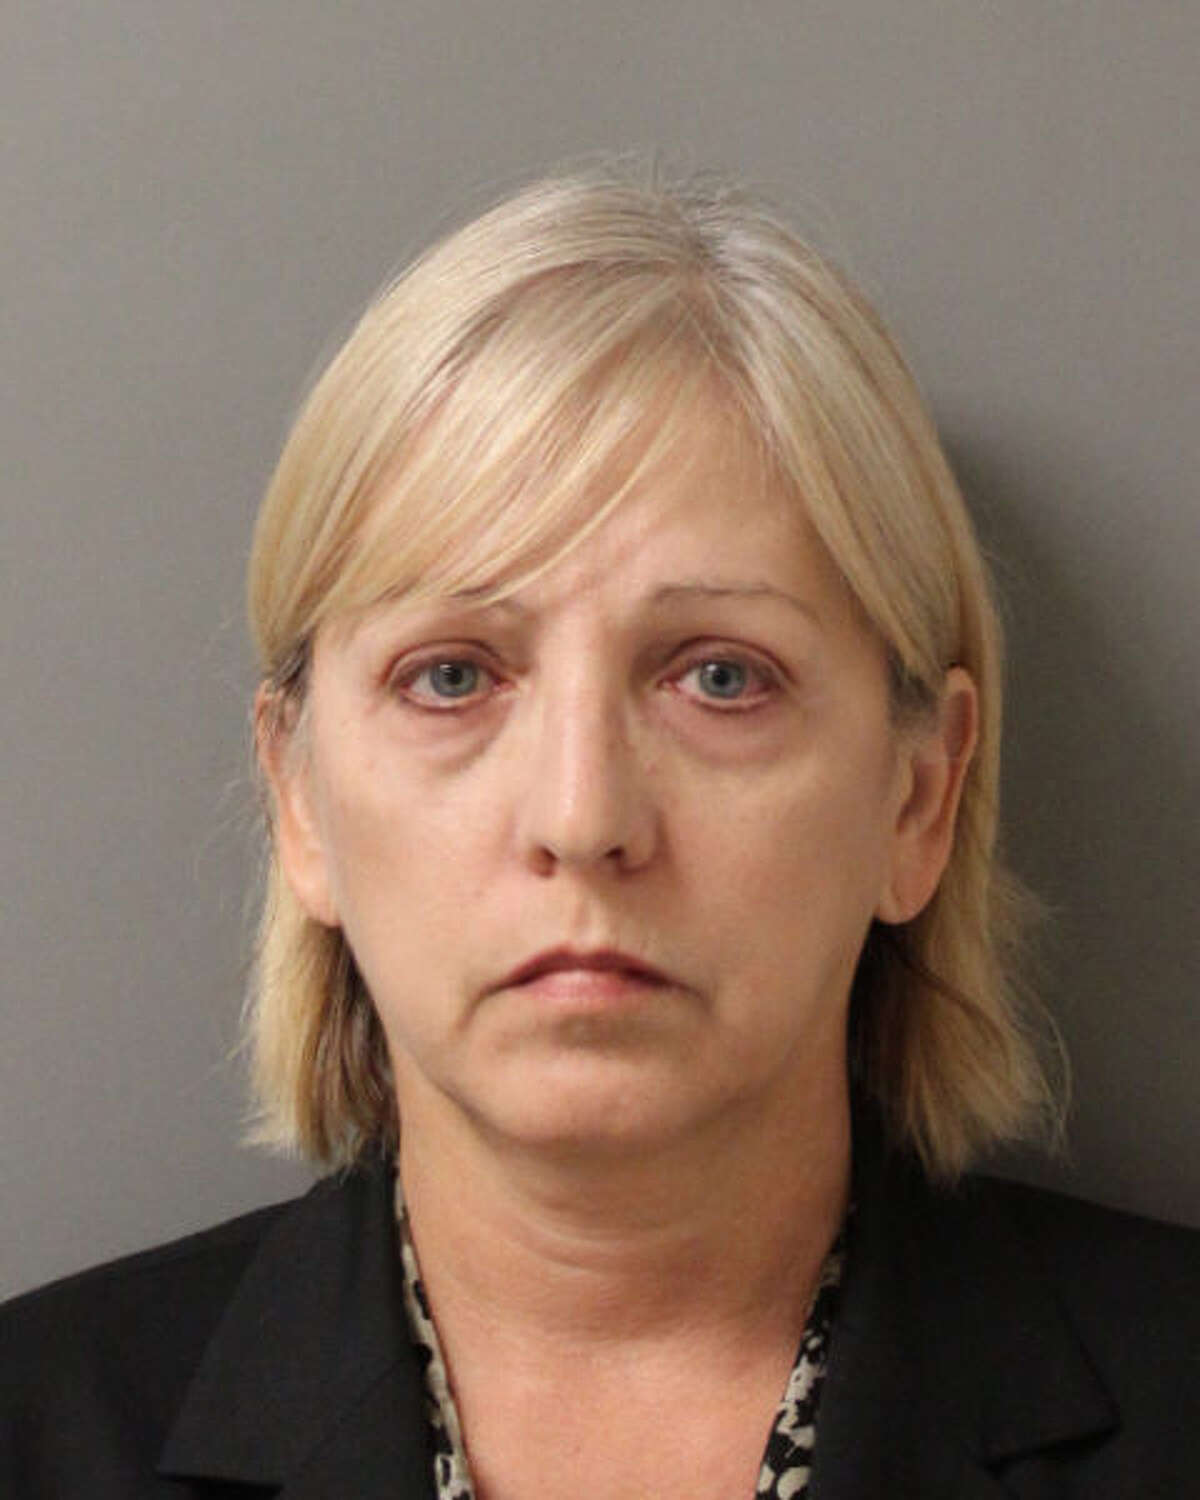 Sandra Melgar, 57, was convicted of stabbing her husband to death, then staging their residence to look like a violent home invasion had occurred. The case went to trial August 2017.